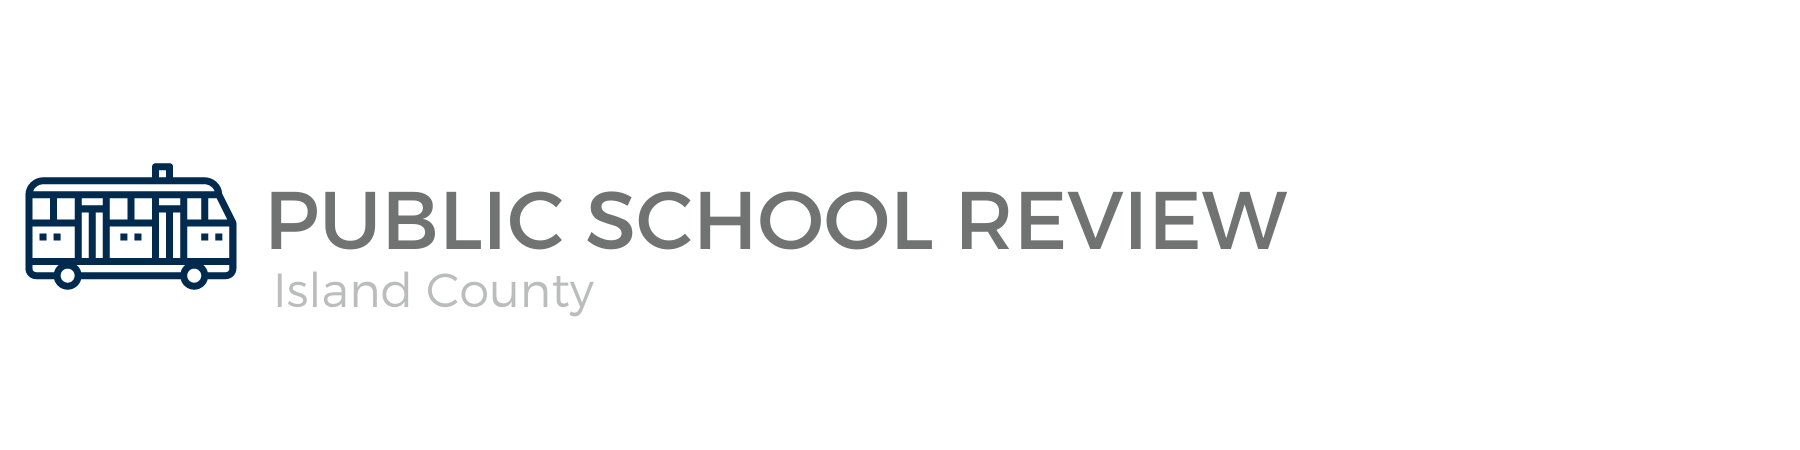 Public School, School Review, School, Whidbey Island Schools, Keep connected, Windermere Whidbey Island